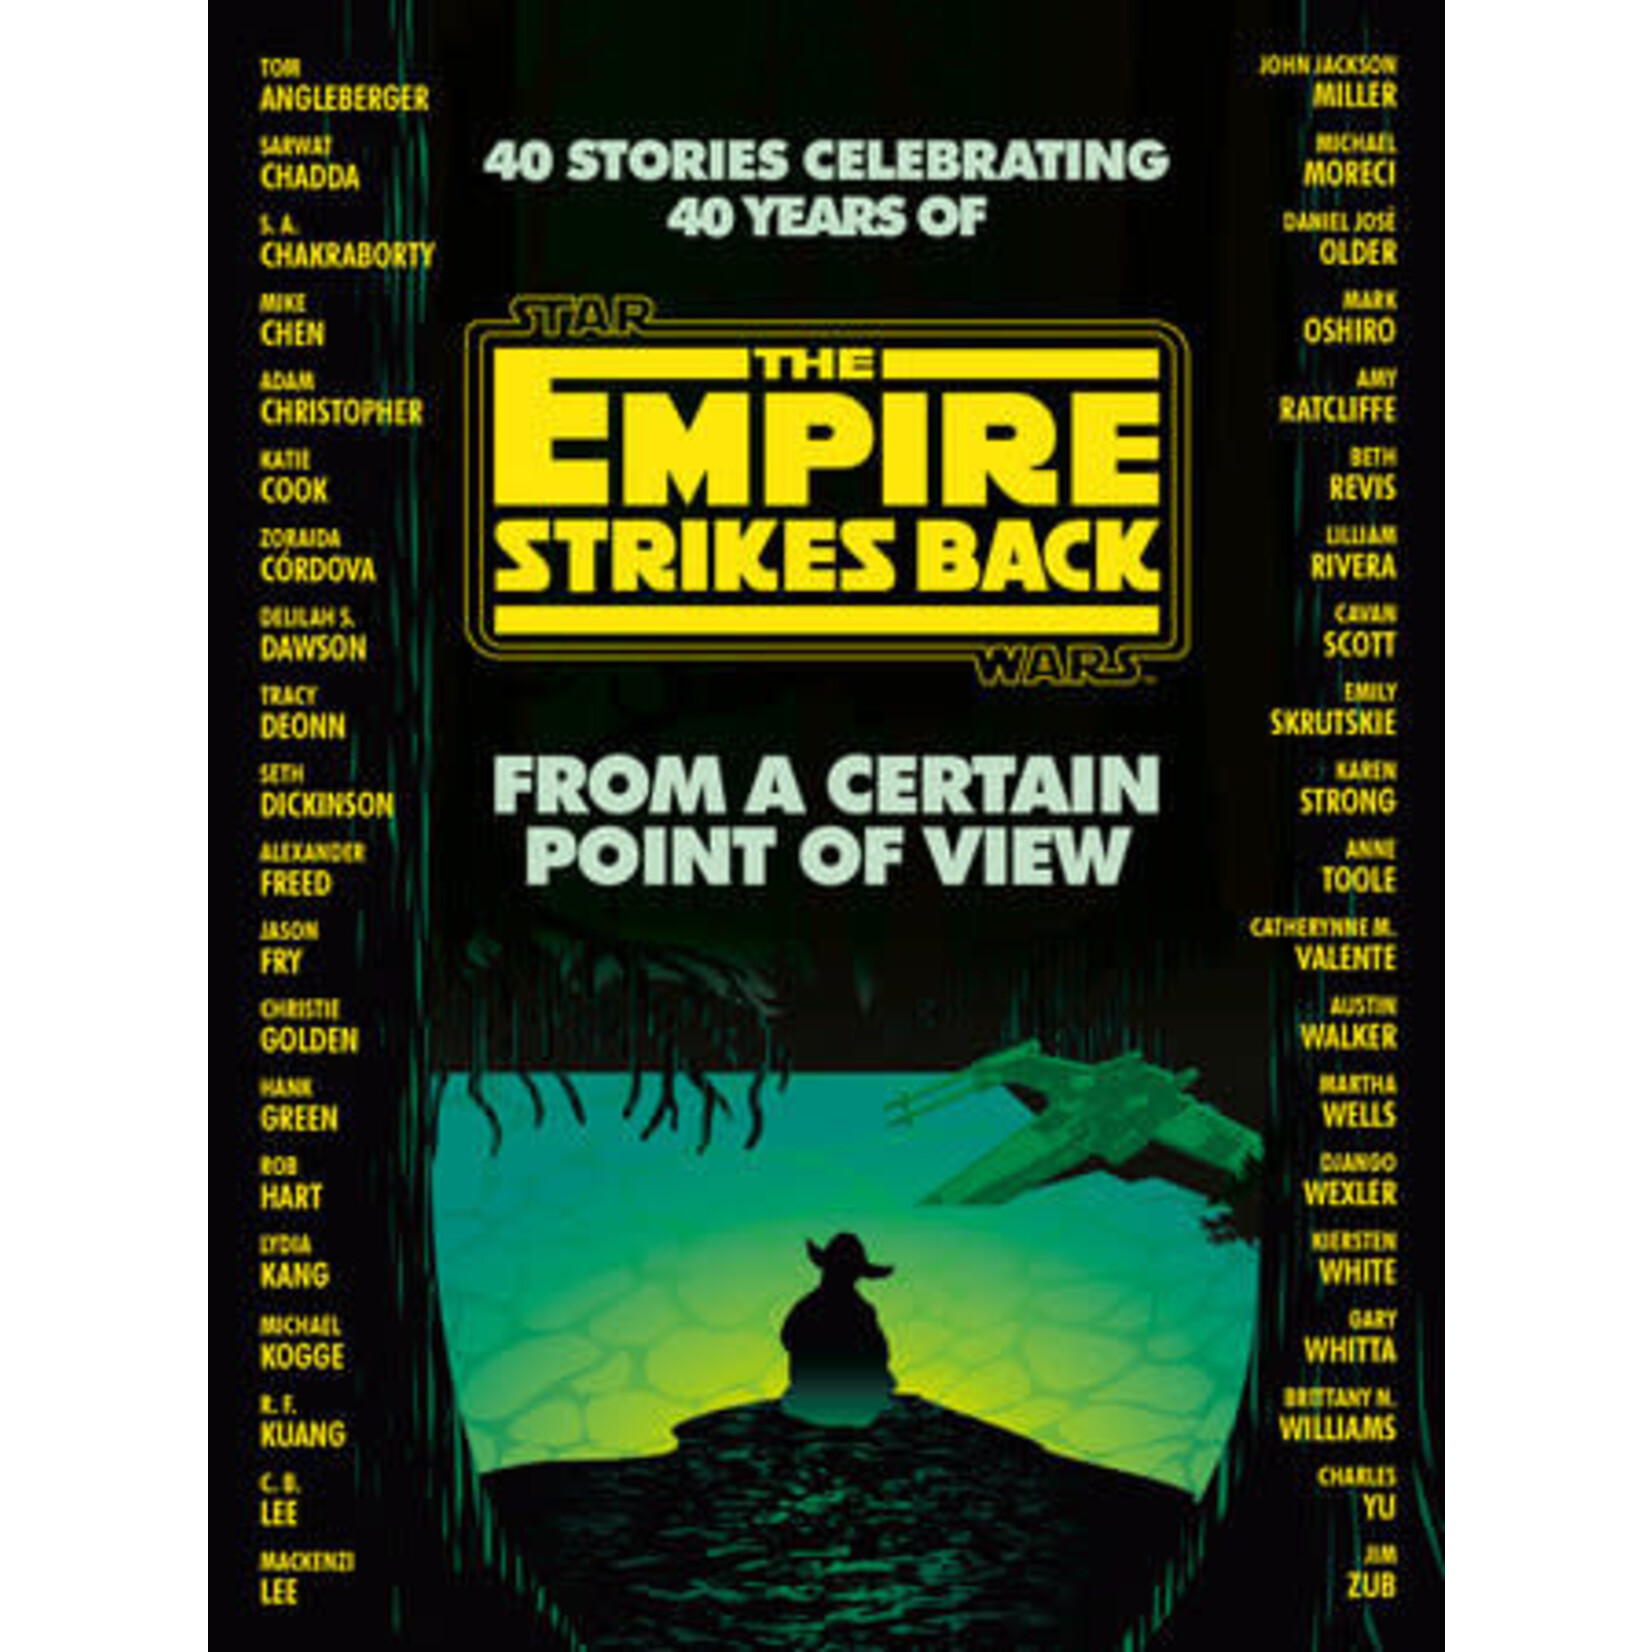 Various - From a Certain Point of View: The Empire Strikes Back (Star Wars) - Paperback (NEW)